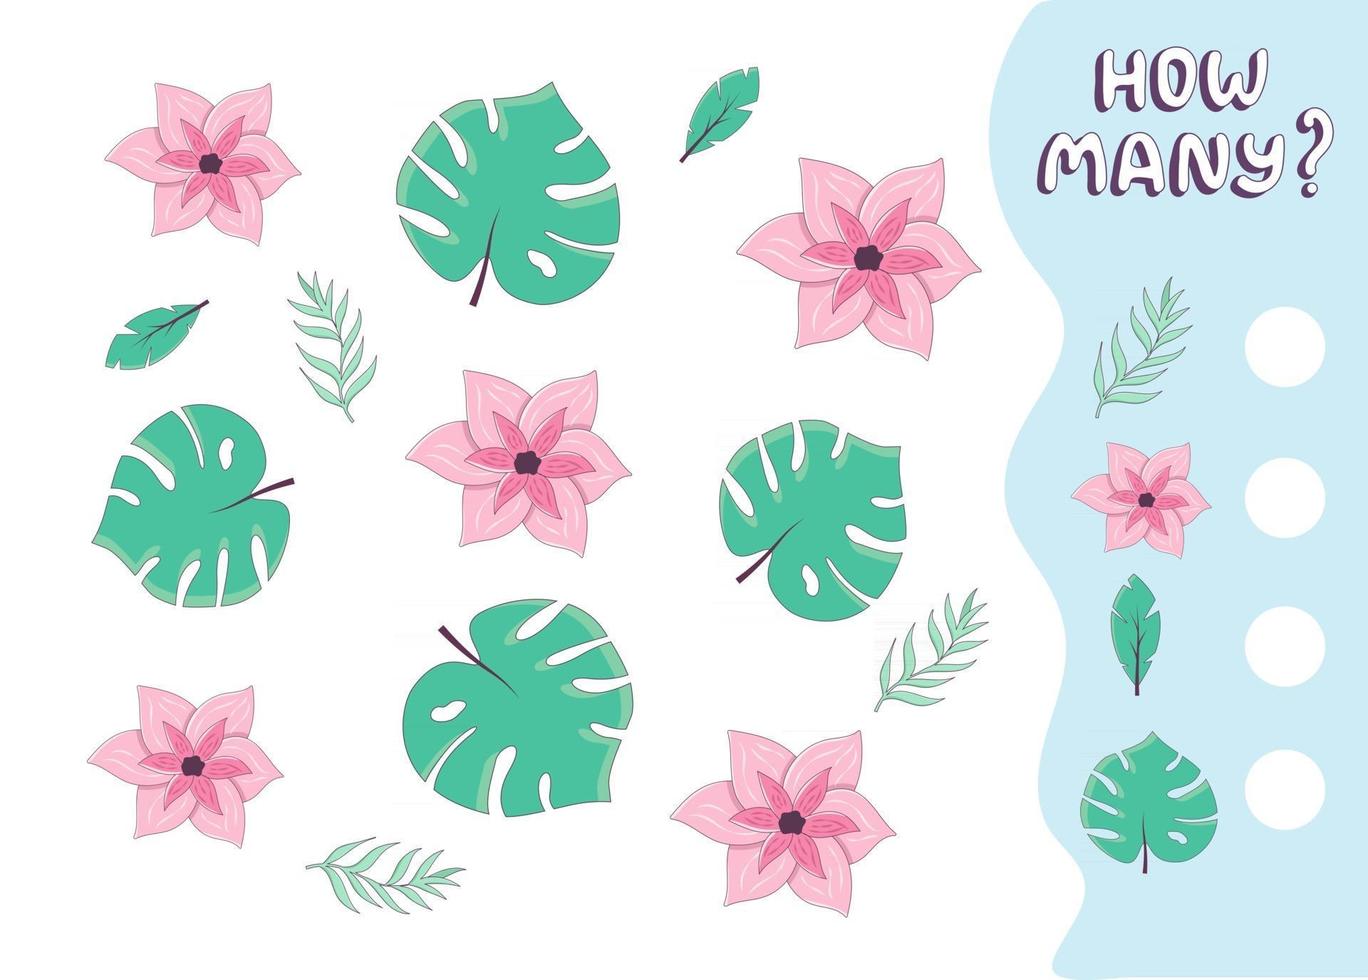 Counting game for preschool kids. Educational math game. Count how many tropical flowers and leaves there are and write down the result. Vector illustration in cartoon style